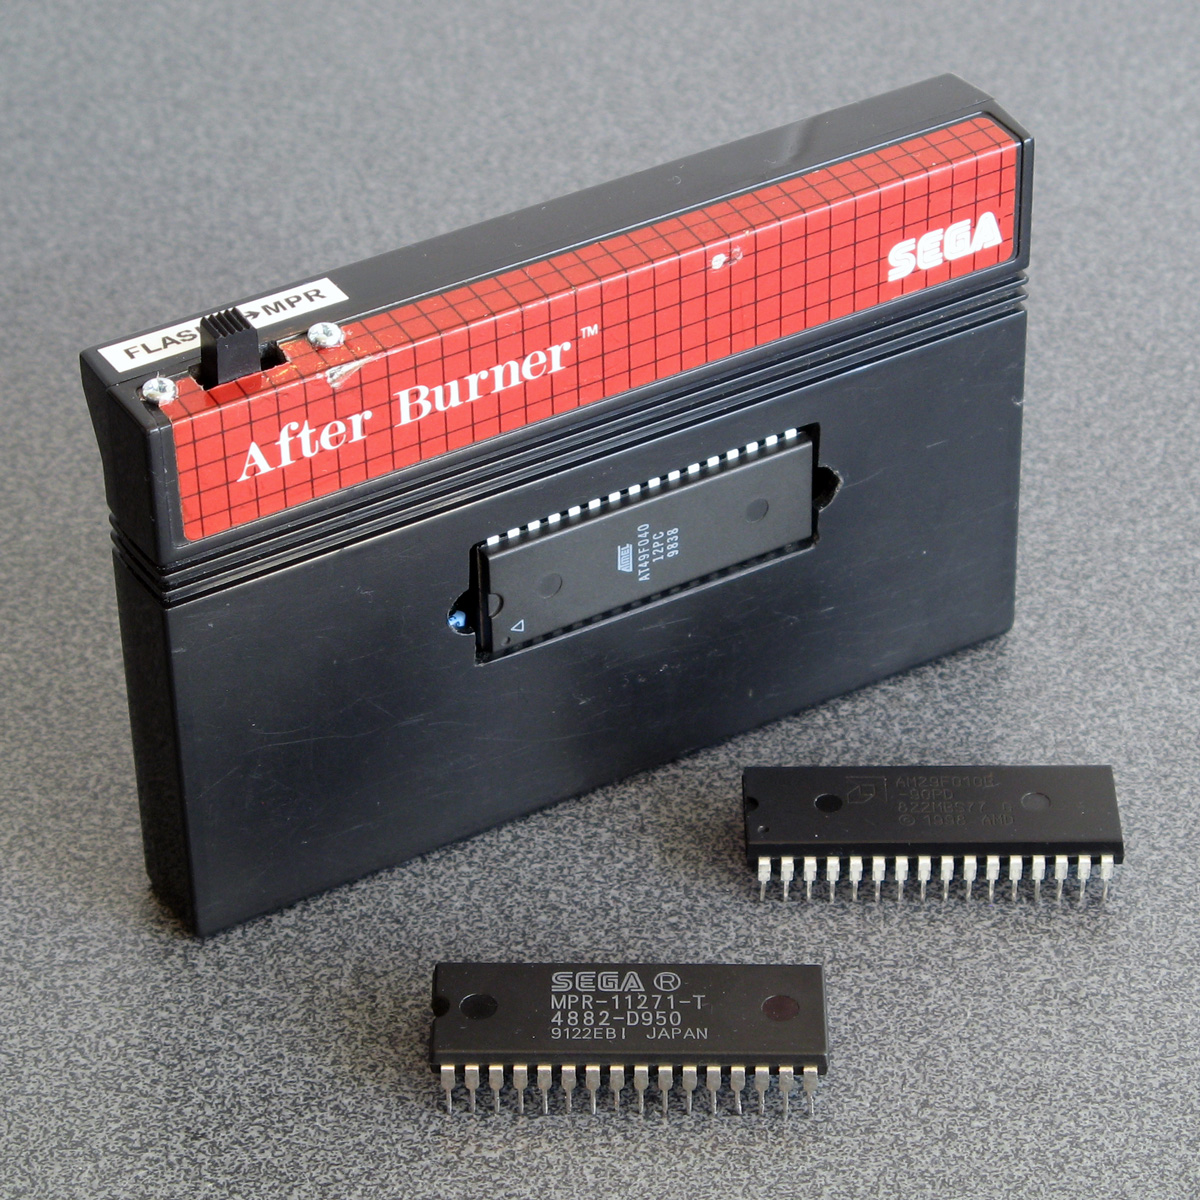 Modifying a Master System cartridge for use with flash ROMs • Journal •